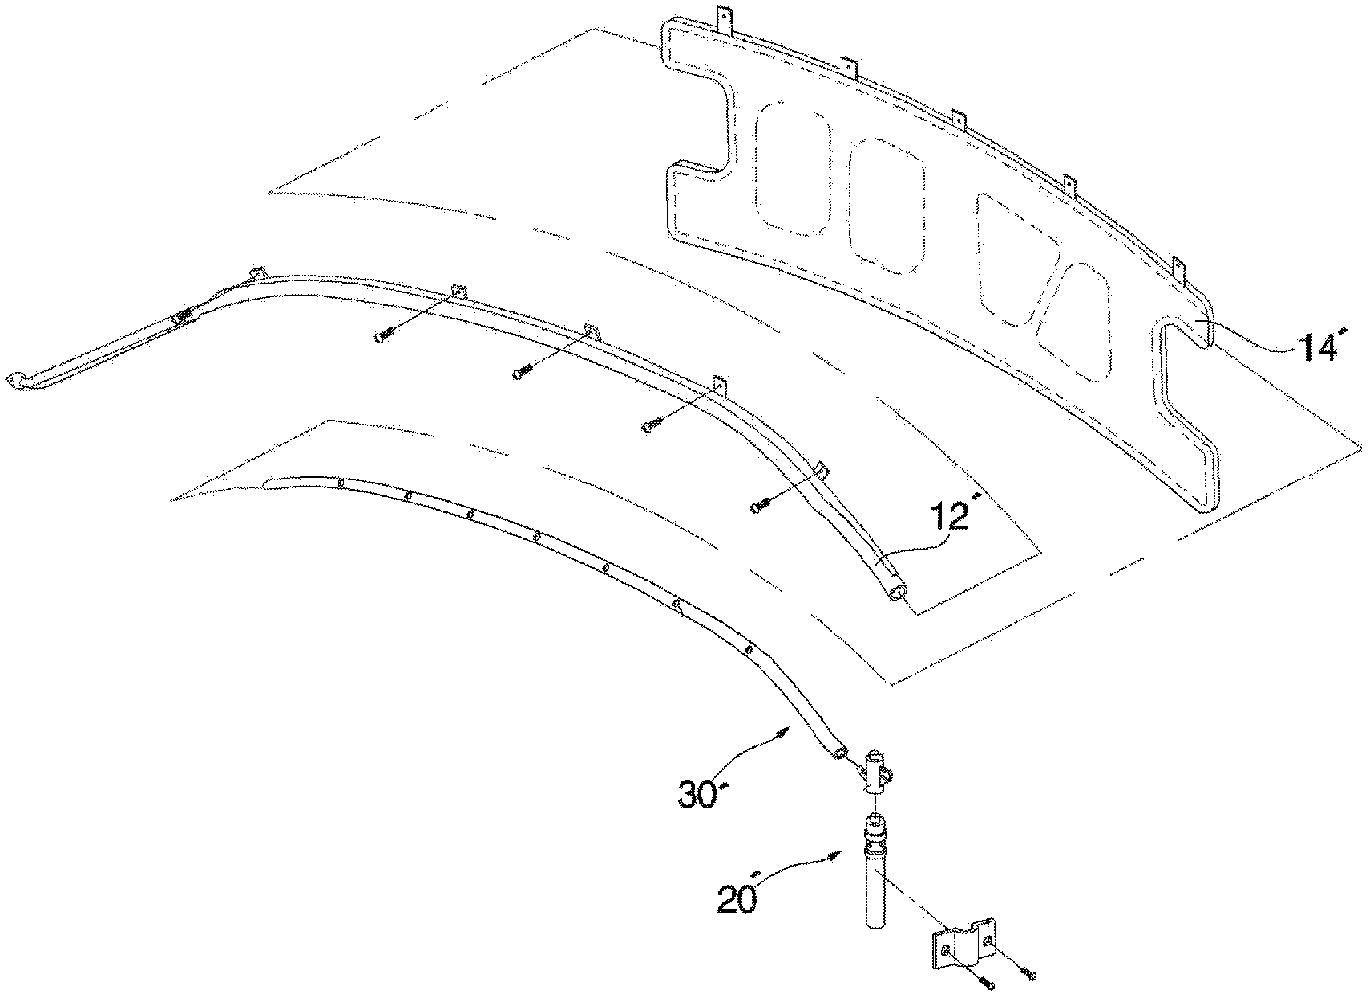 Anti-twist device for curtain airbag of vehicle